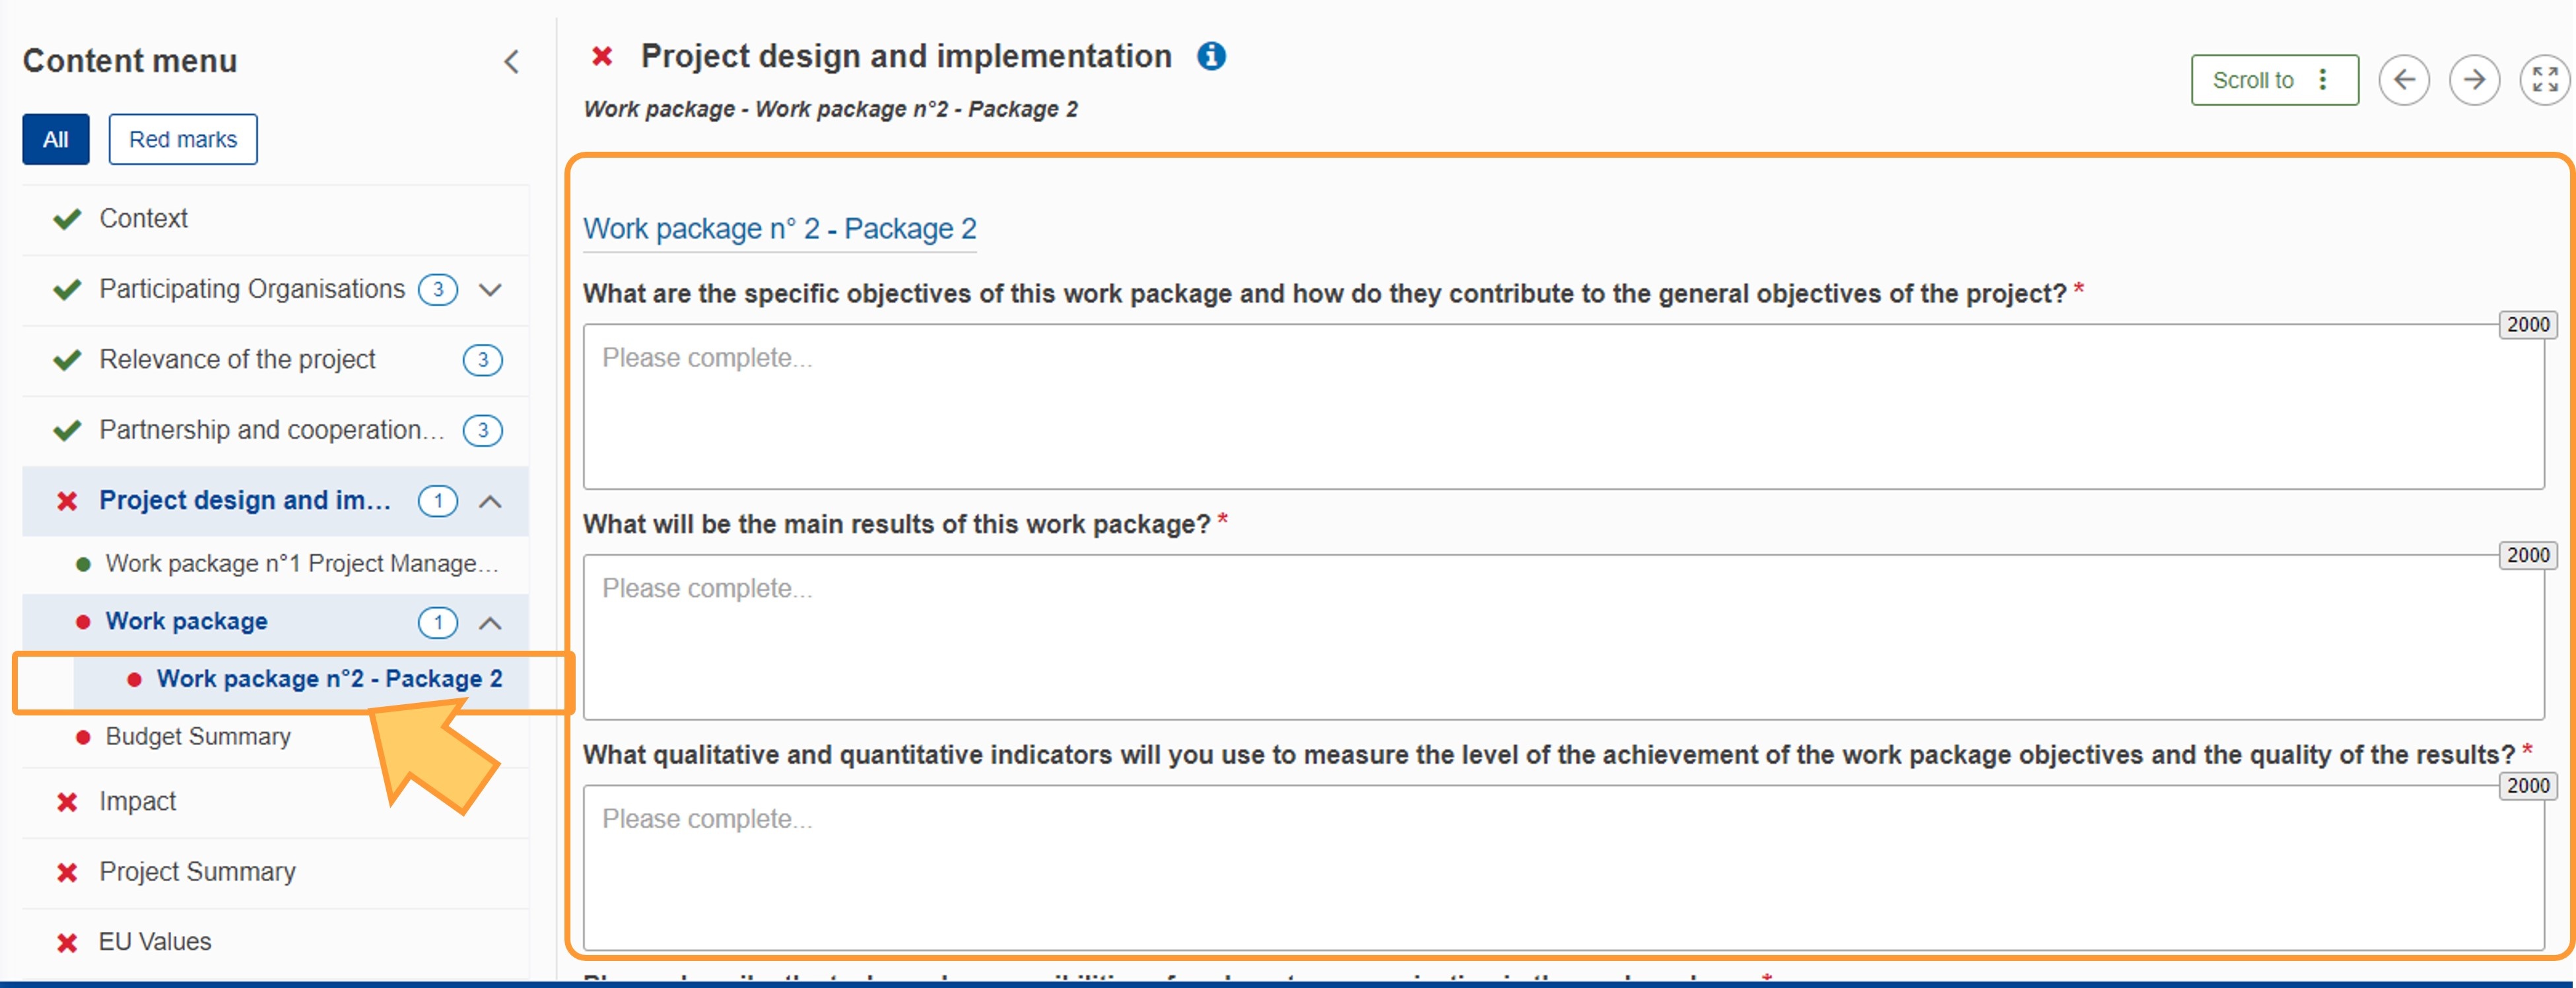 The work package details page opens